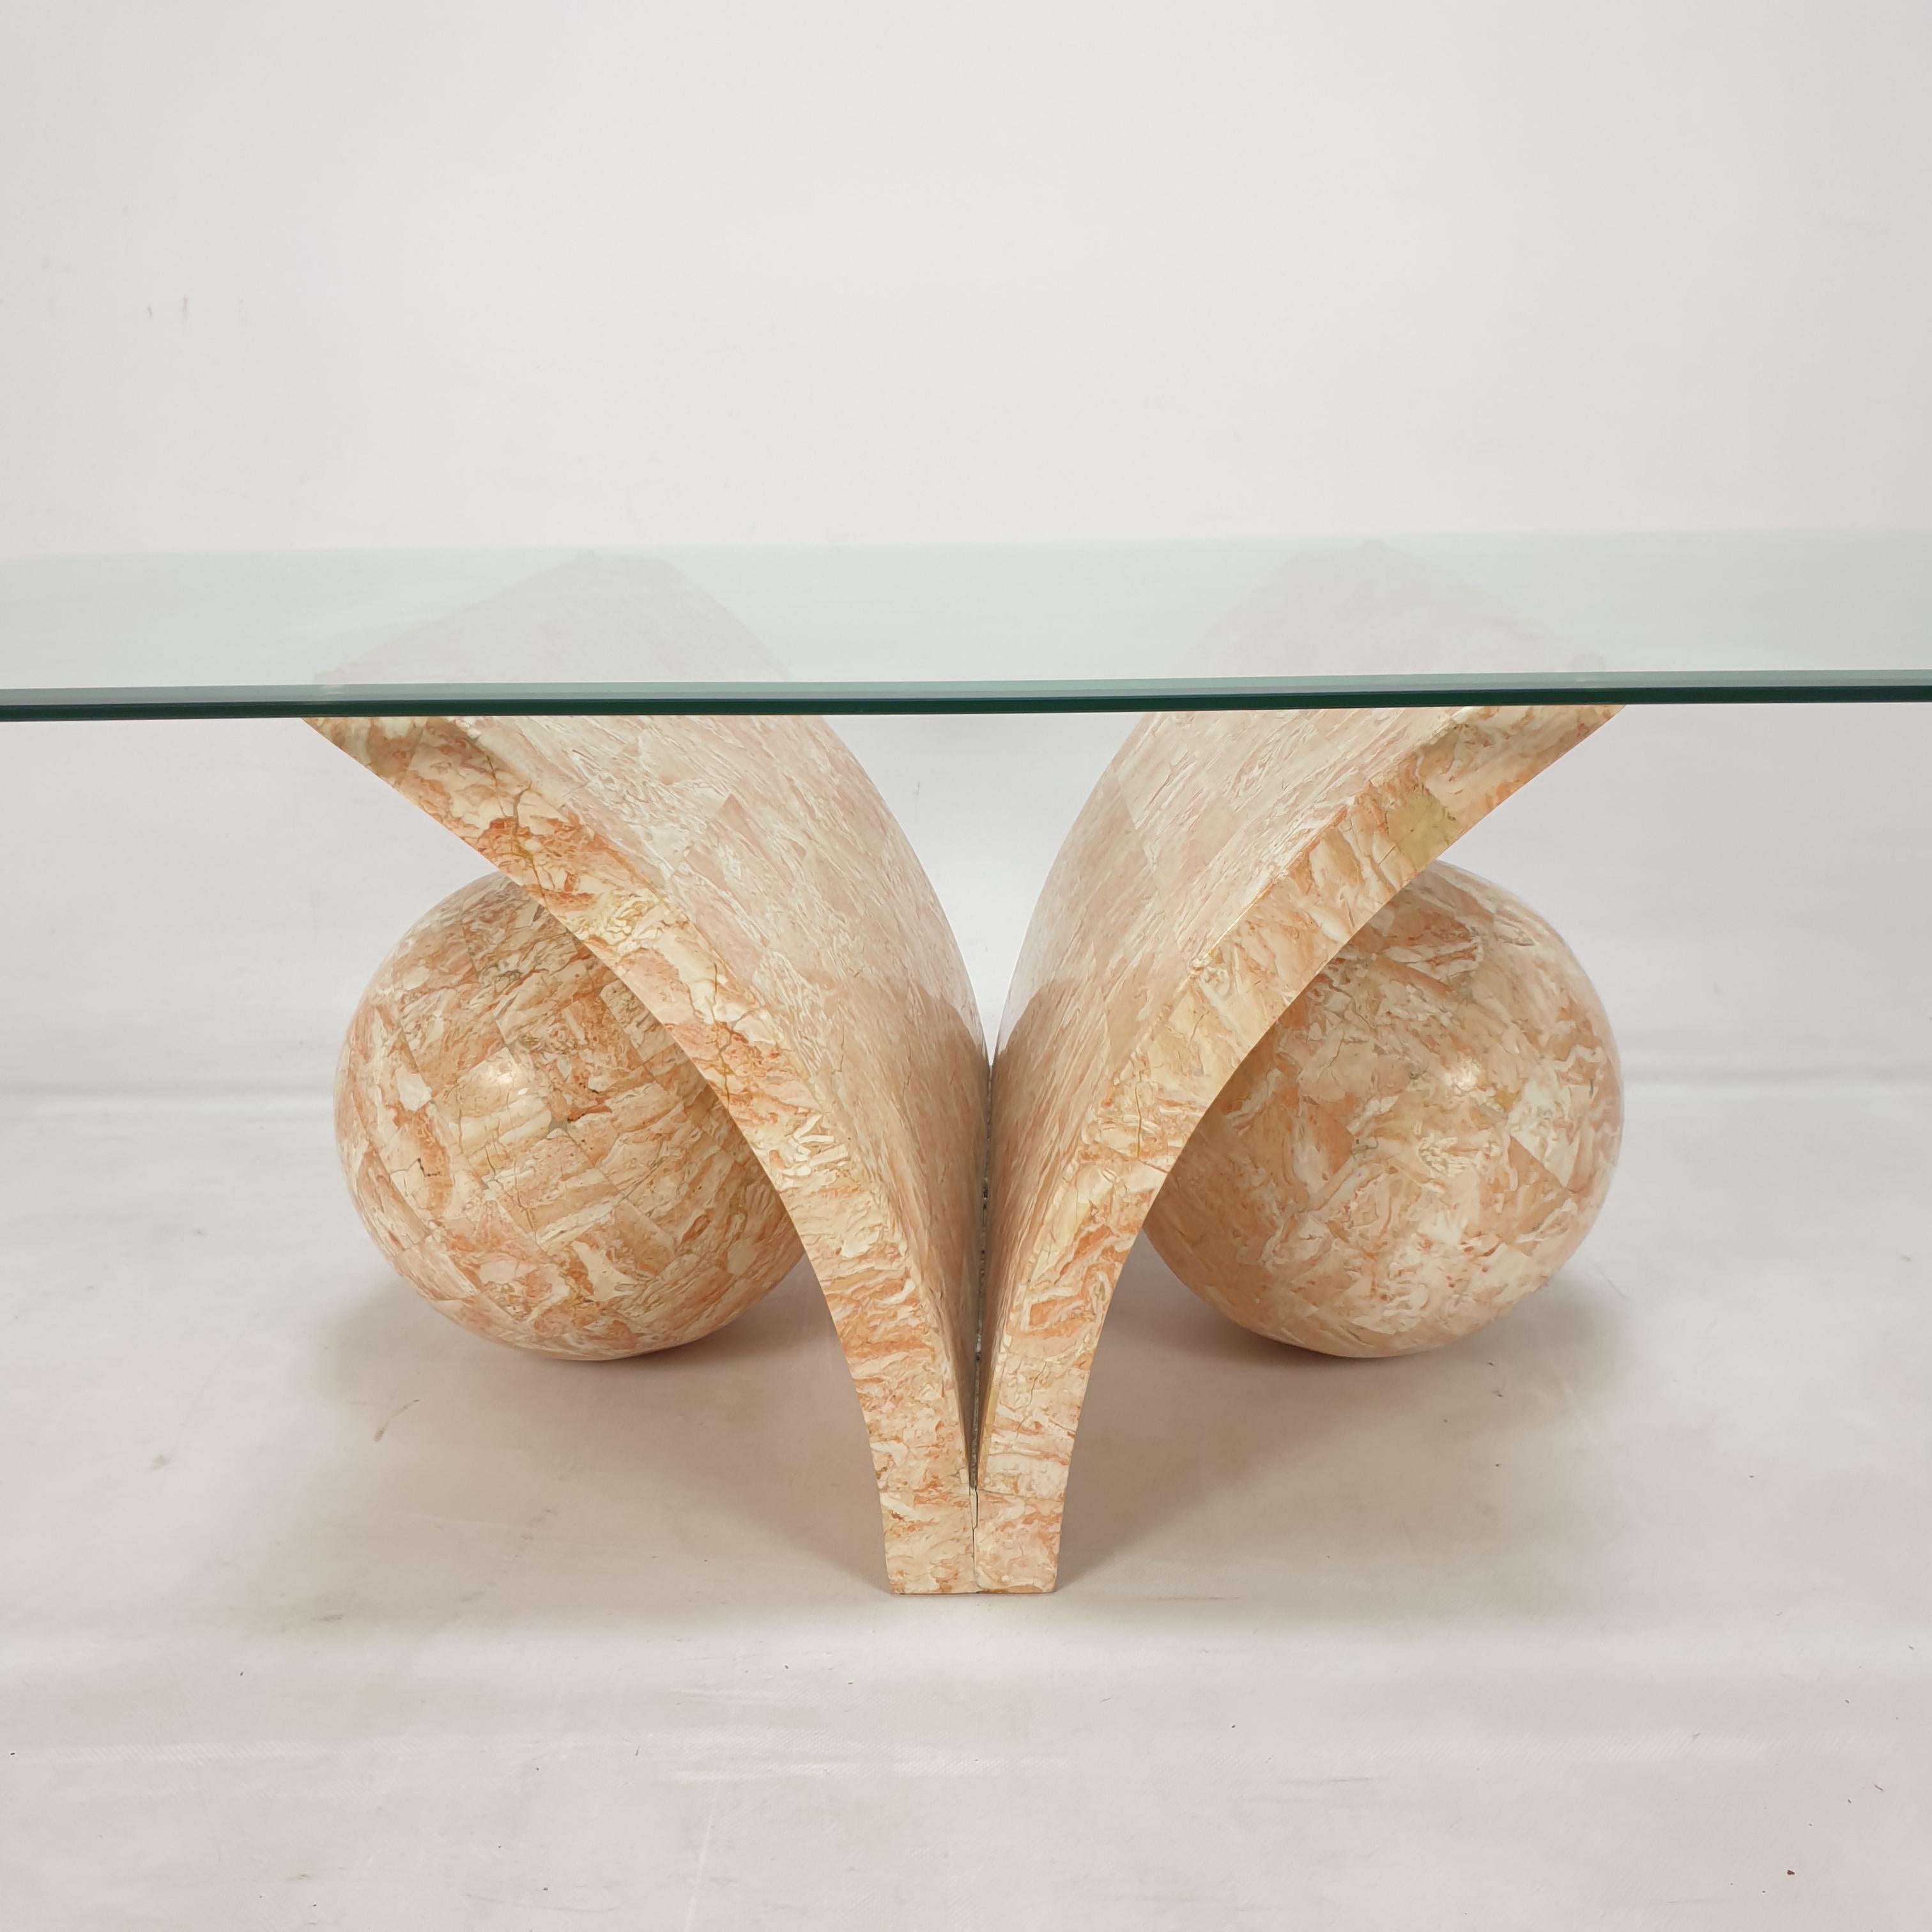 Magnussen Ponte Mactan Stone or Fossil Stone Coffee Table, 1980s For Sale 1